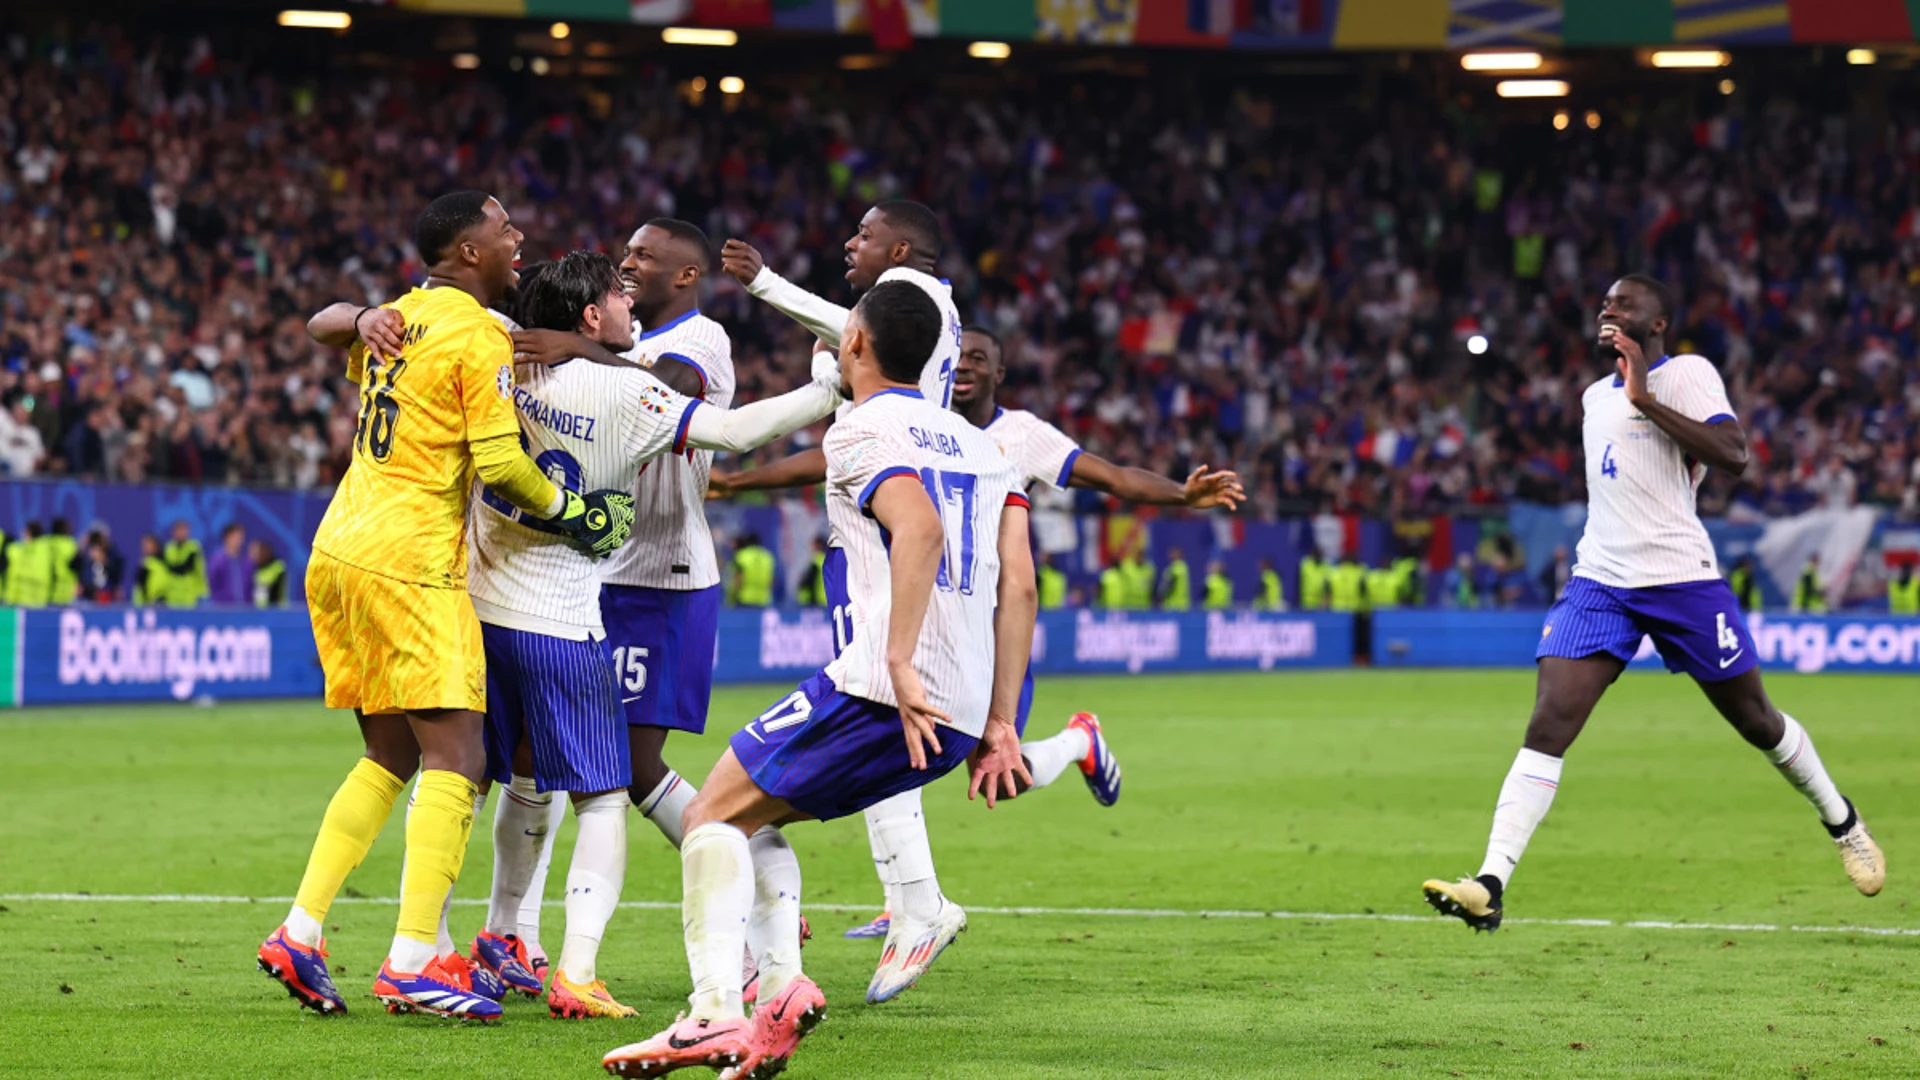 France beat Portugal on penalties to set up Euros semifinal against Spain